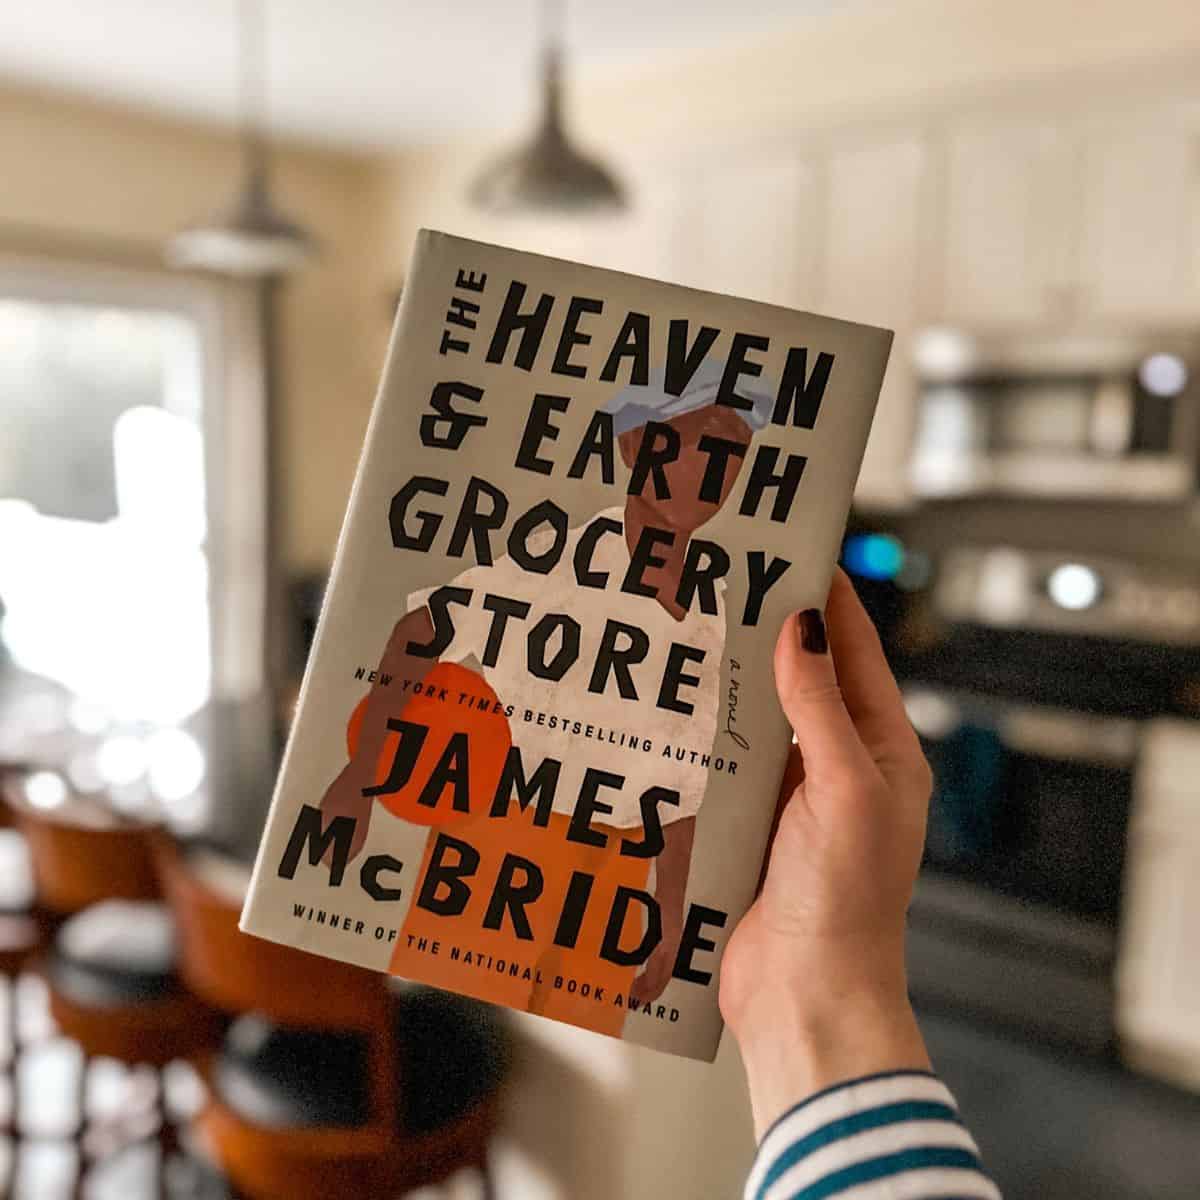 the heaven and earth grocery store by james mcbride.